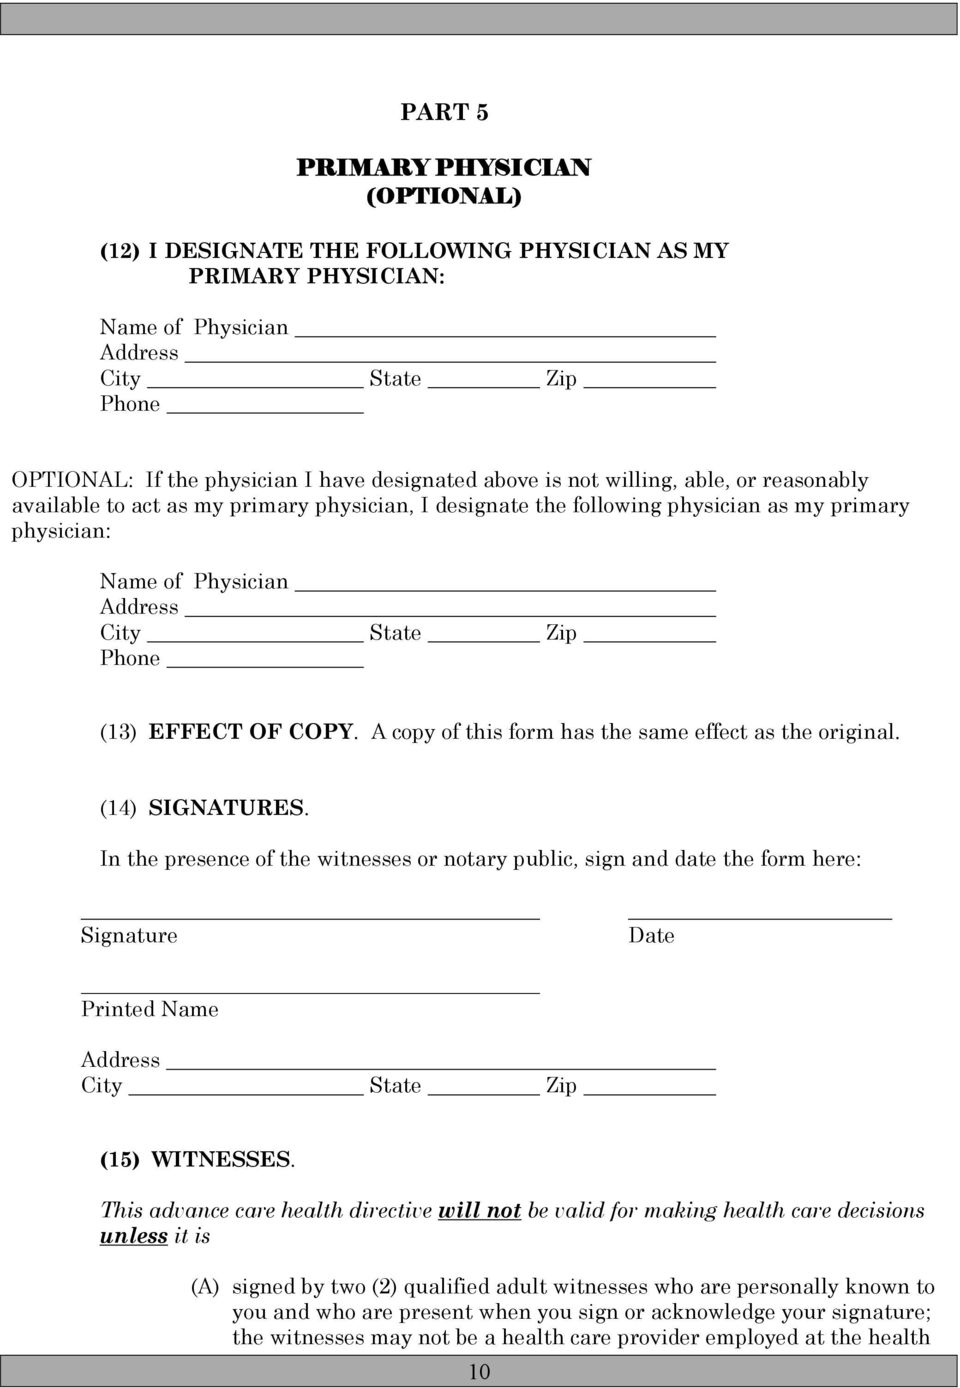 A copy of this form has the same effect as the original. (14) SIGNATURES. In the presence of the witnesses or notary public, sign and date the form here: Signature Date Printed Name (15) WITNESSES.